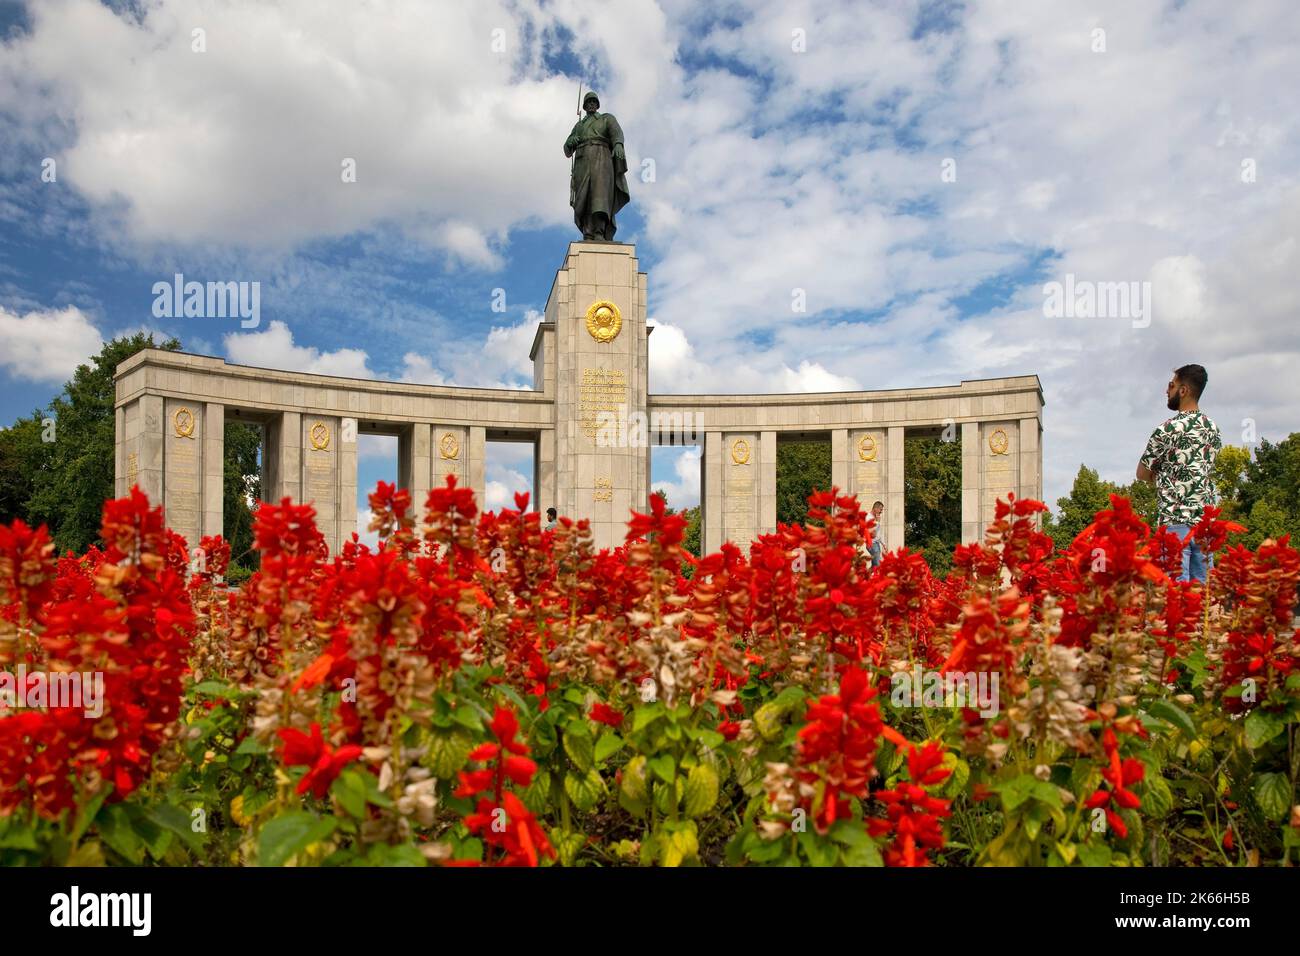 Soviet memorial with the statue of the Red Army soldier and the Golden State Coat of Arms, Germany, Berlin Stock Photo